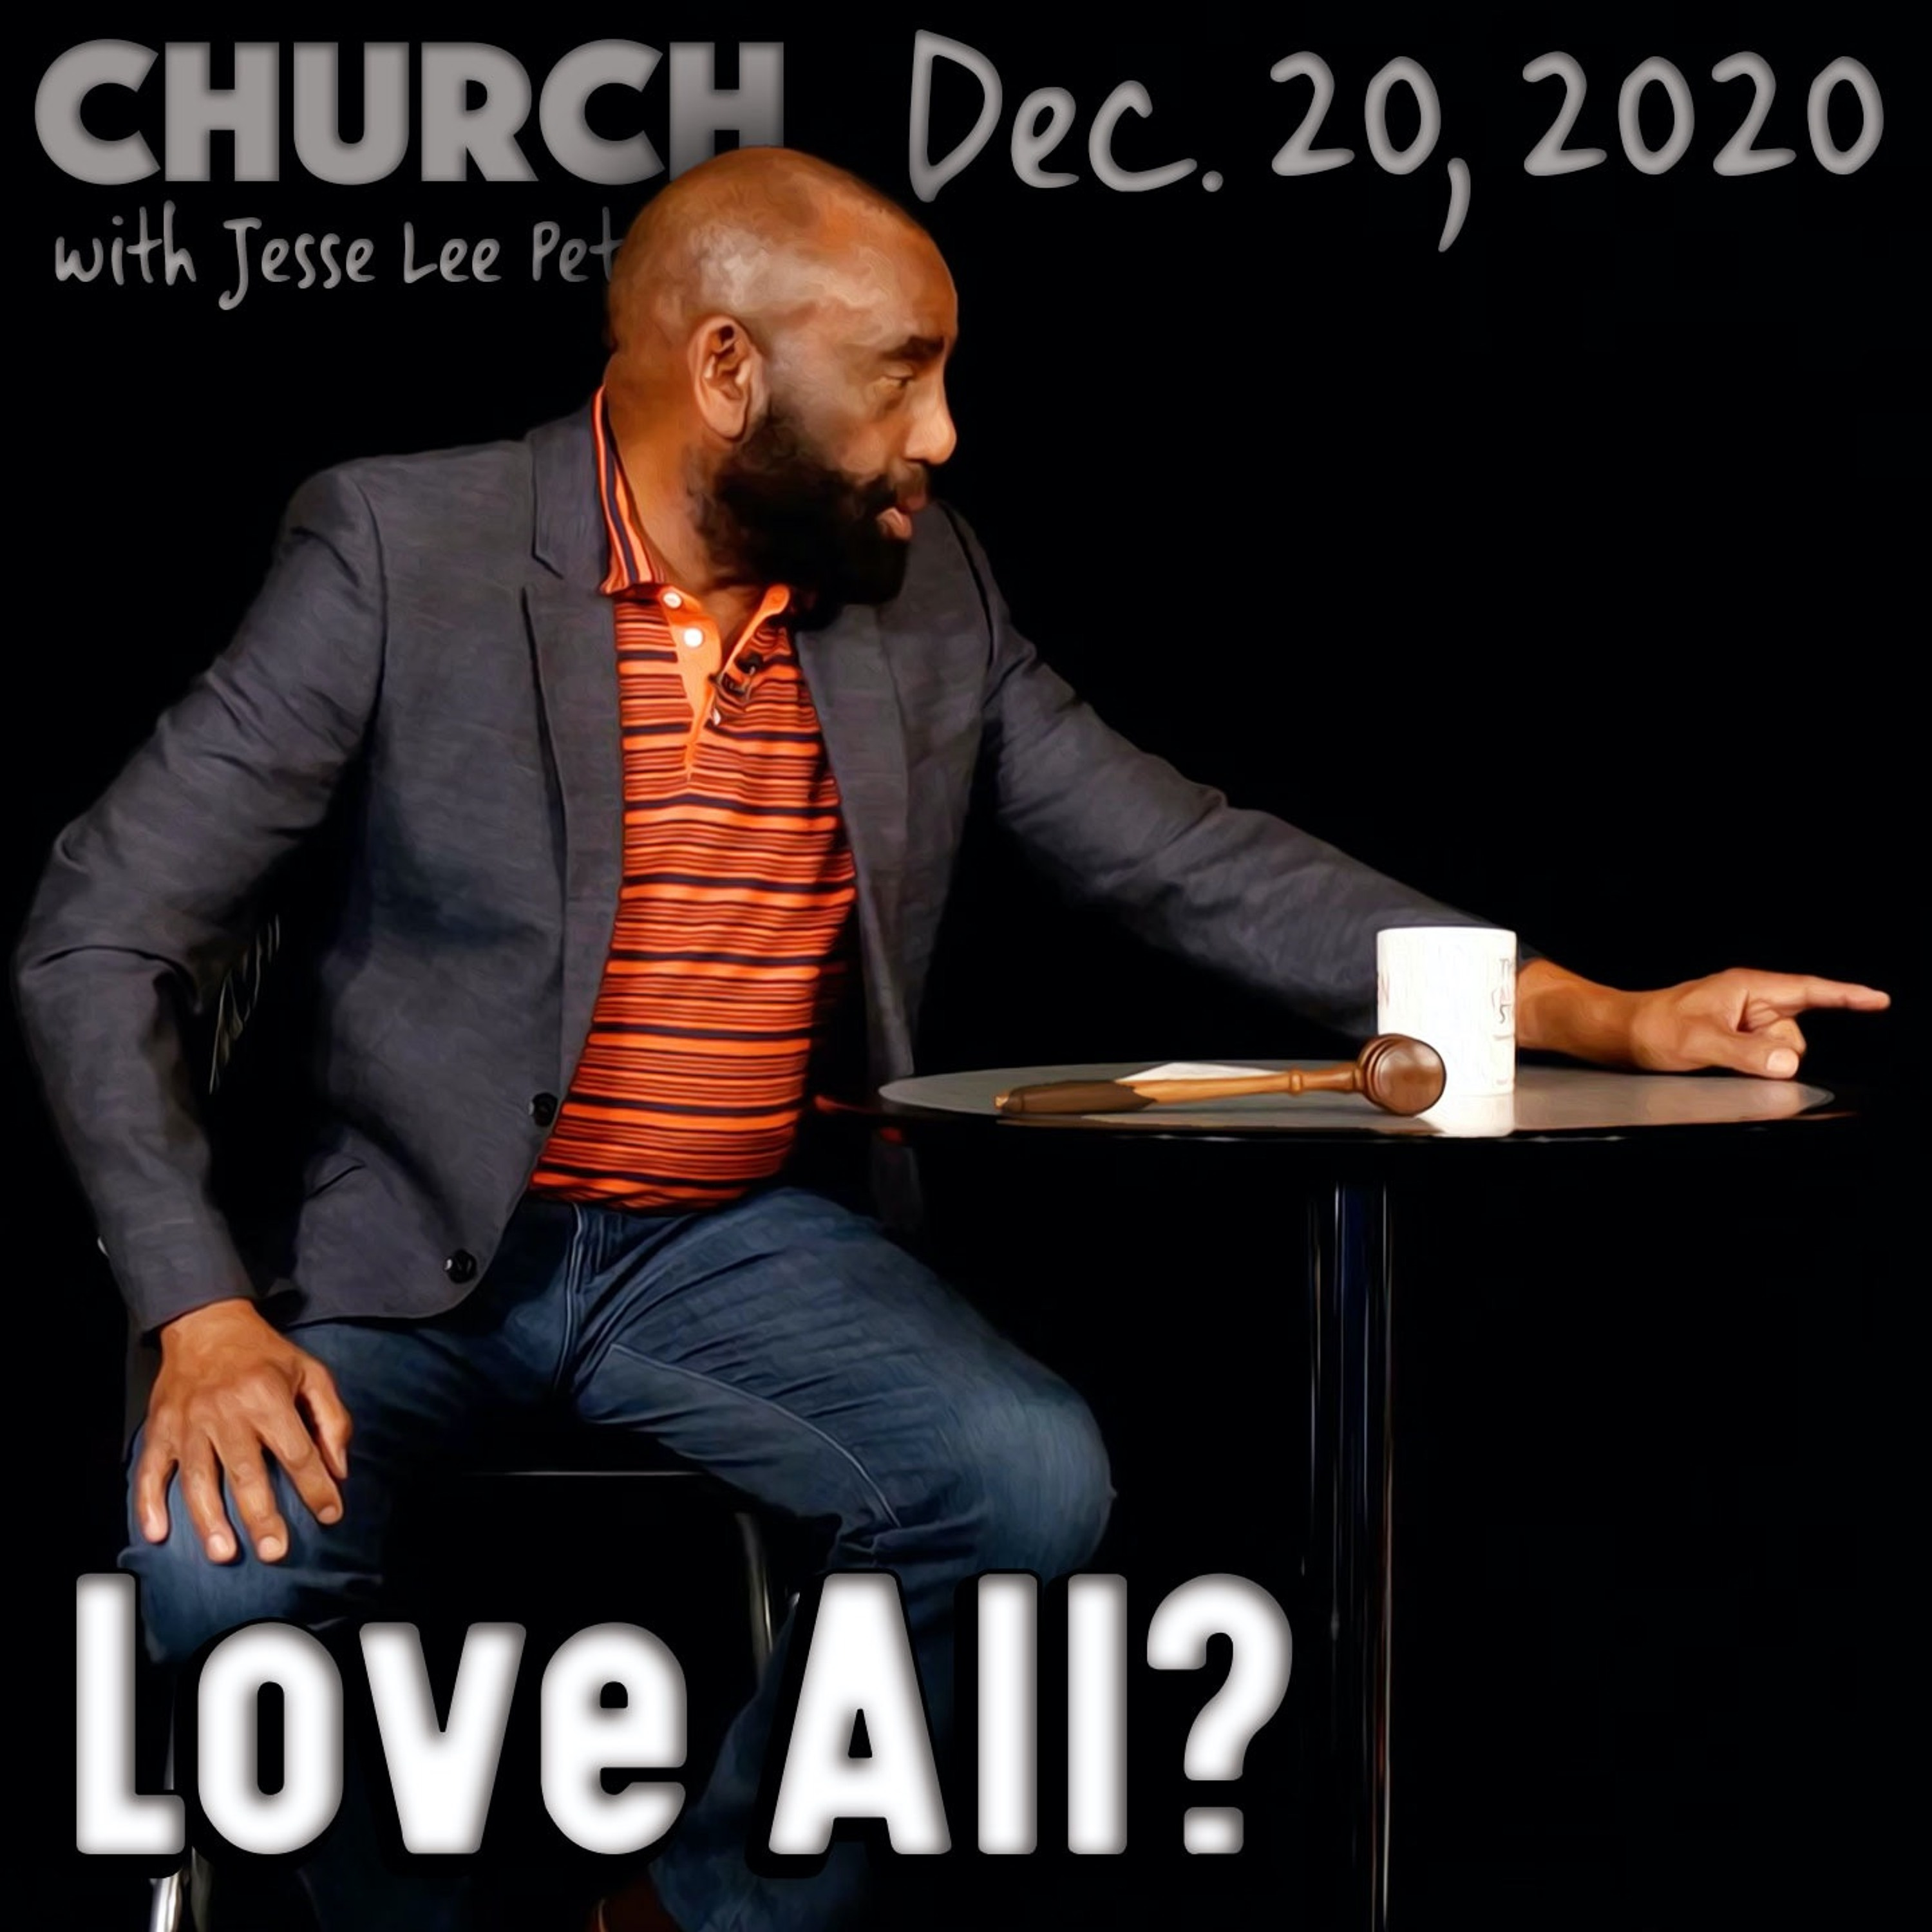 12/20/20 Do You Love All People? (Church)